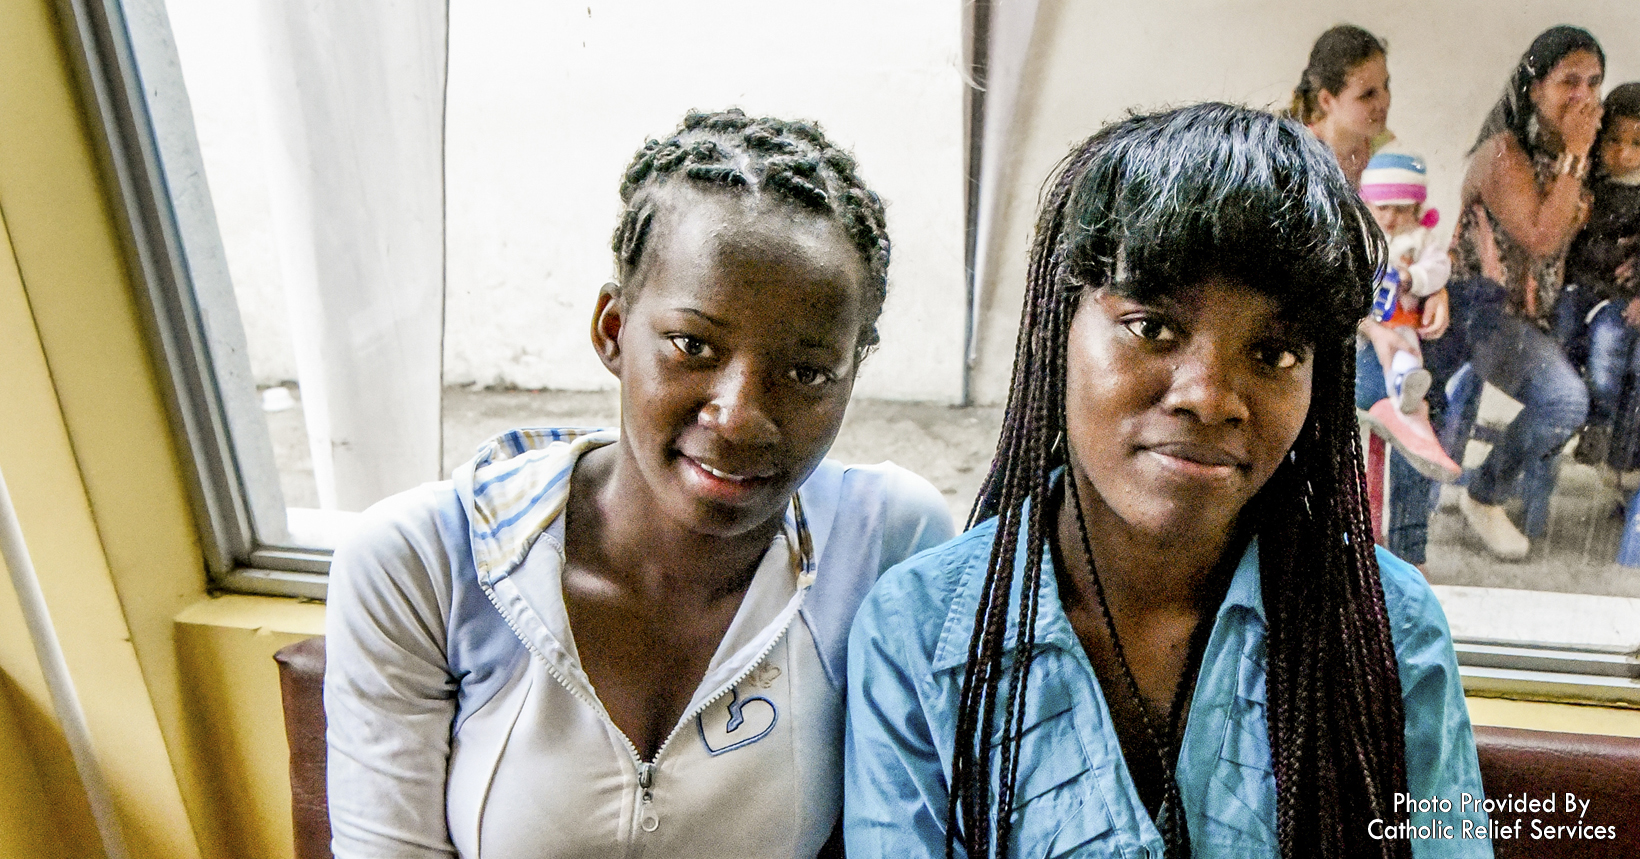 These two young girls are sisters who are seeking refugee like many others. They have faced many difficulties since they have been in Ecuador.